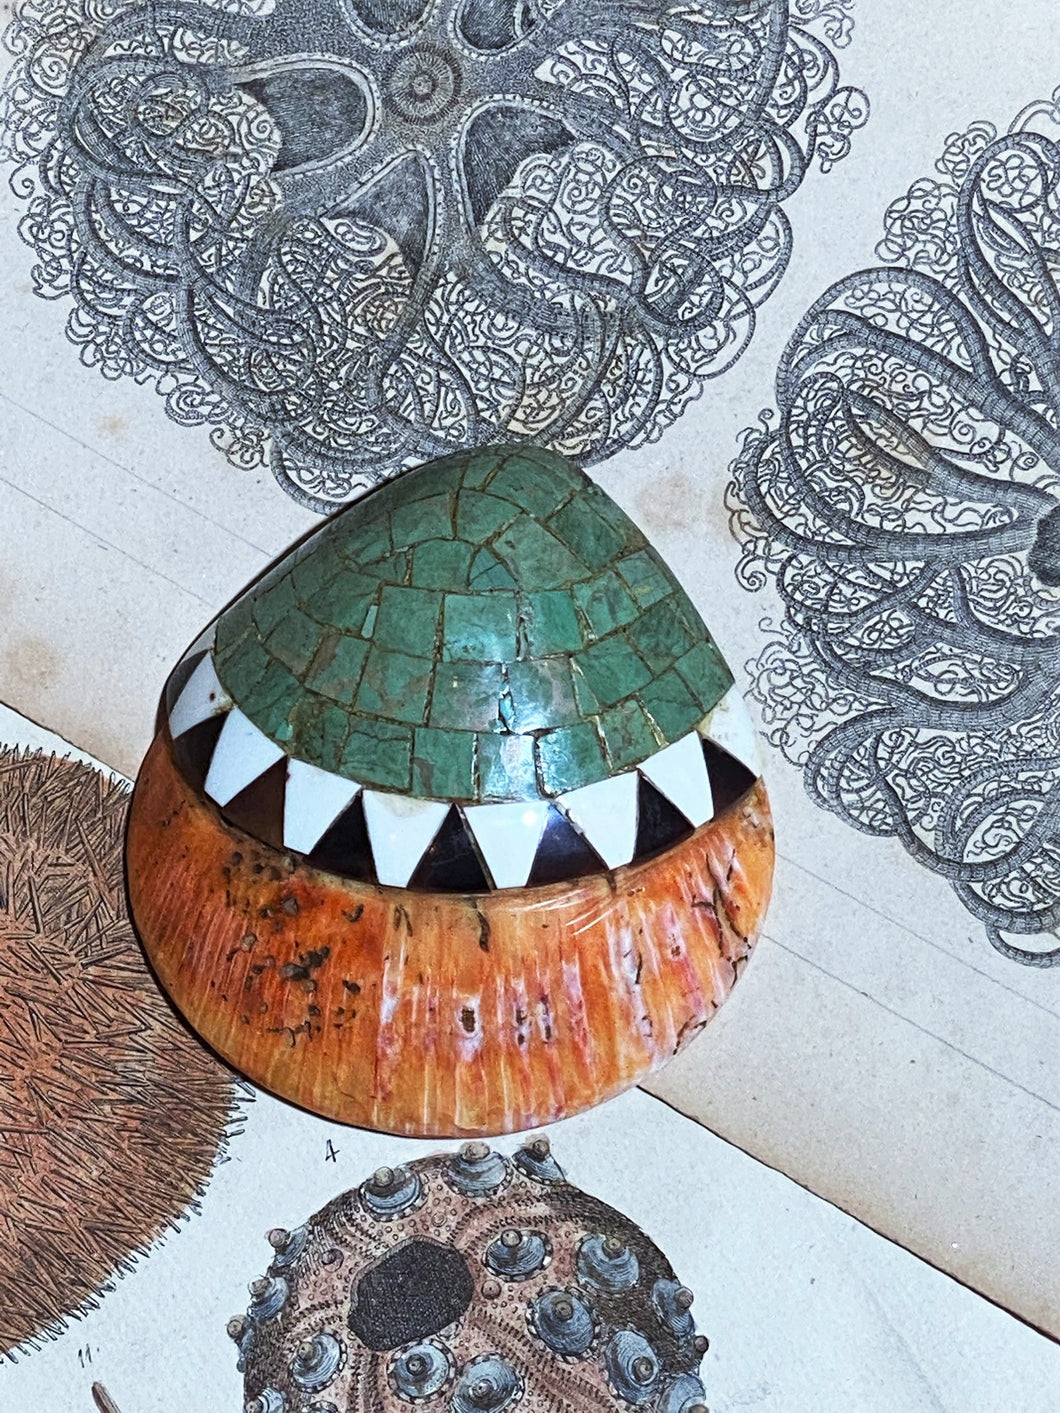 Vintage shell inlaid in turquoise and jet black mosaic typical of Santo Domingo Pueblo in New Mexico.